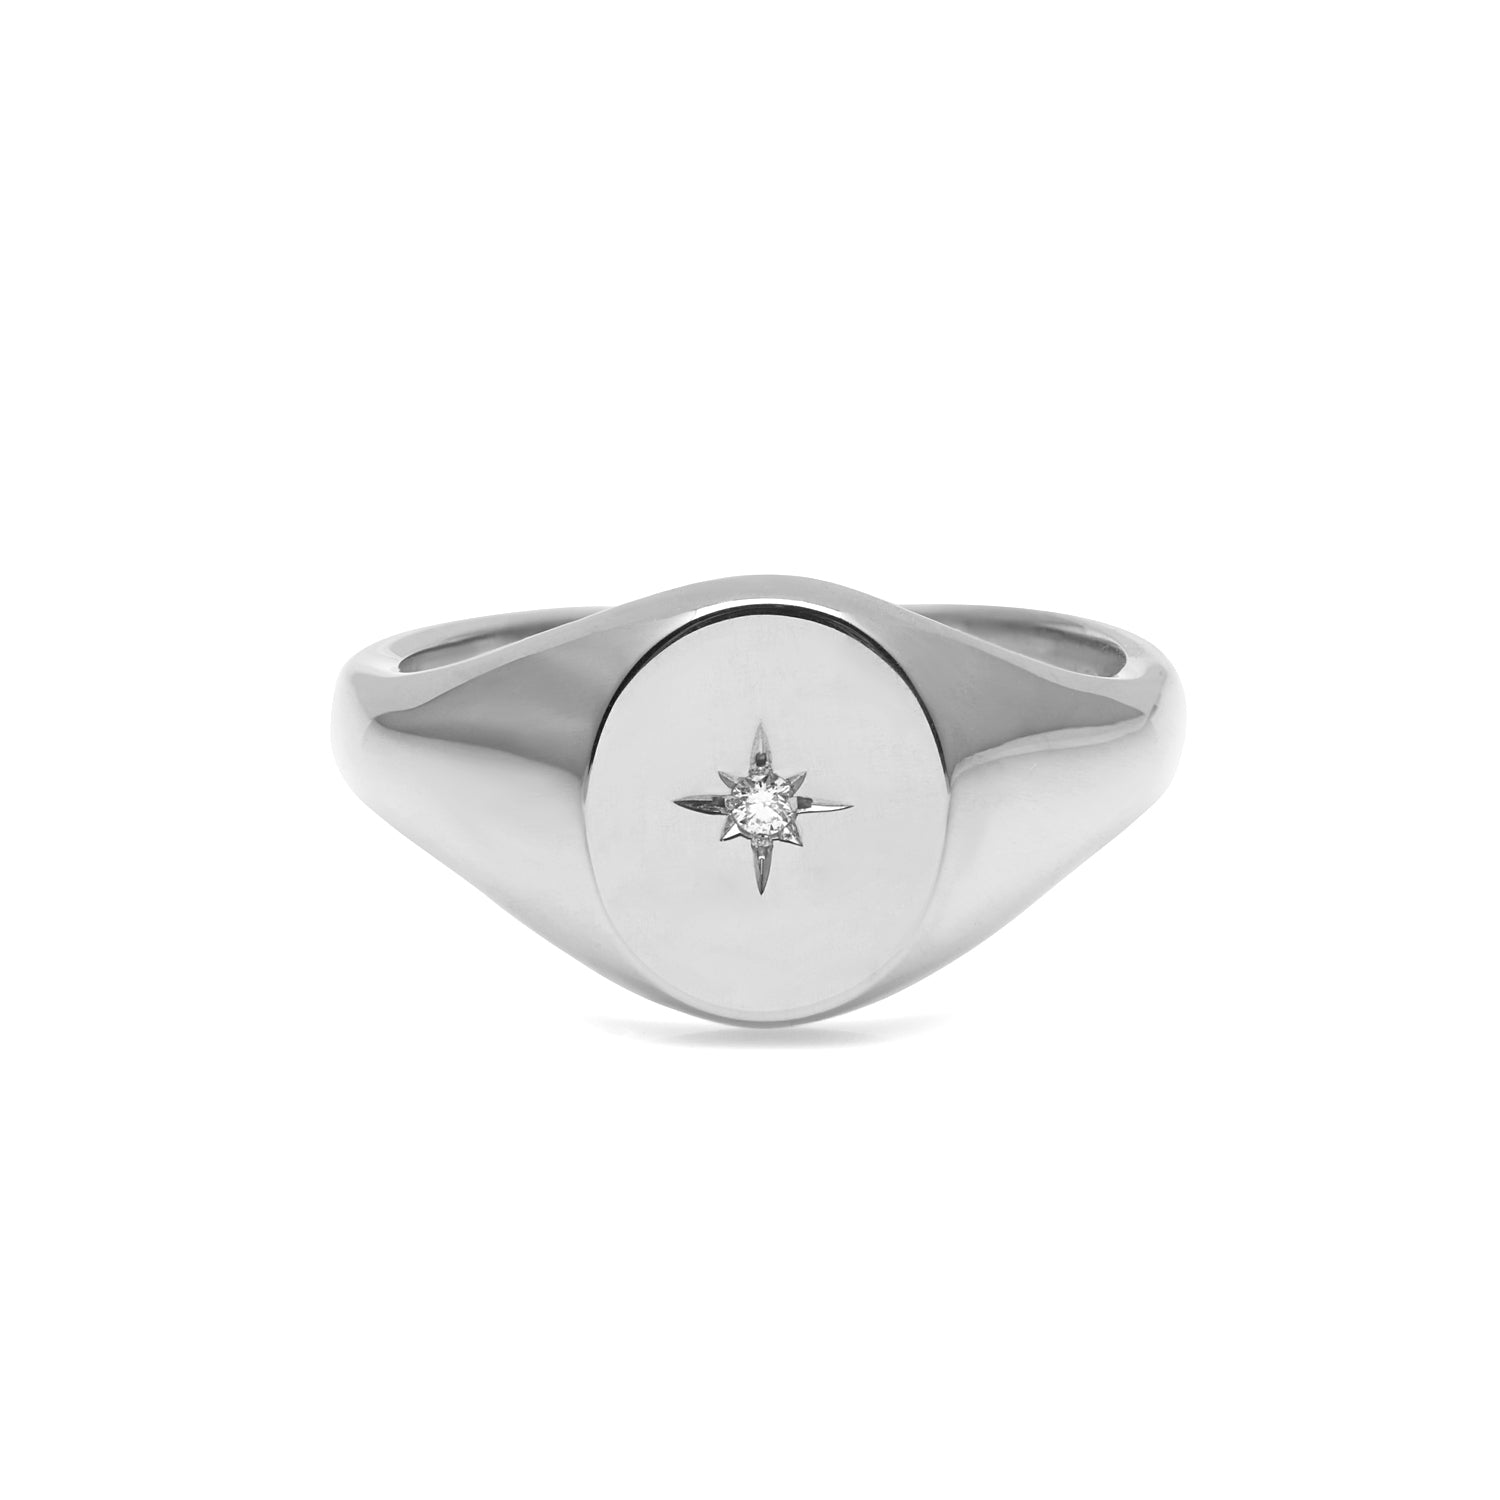 Oval Signet Ring with Star Set Diamond 11x9mm - Silver